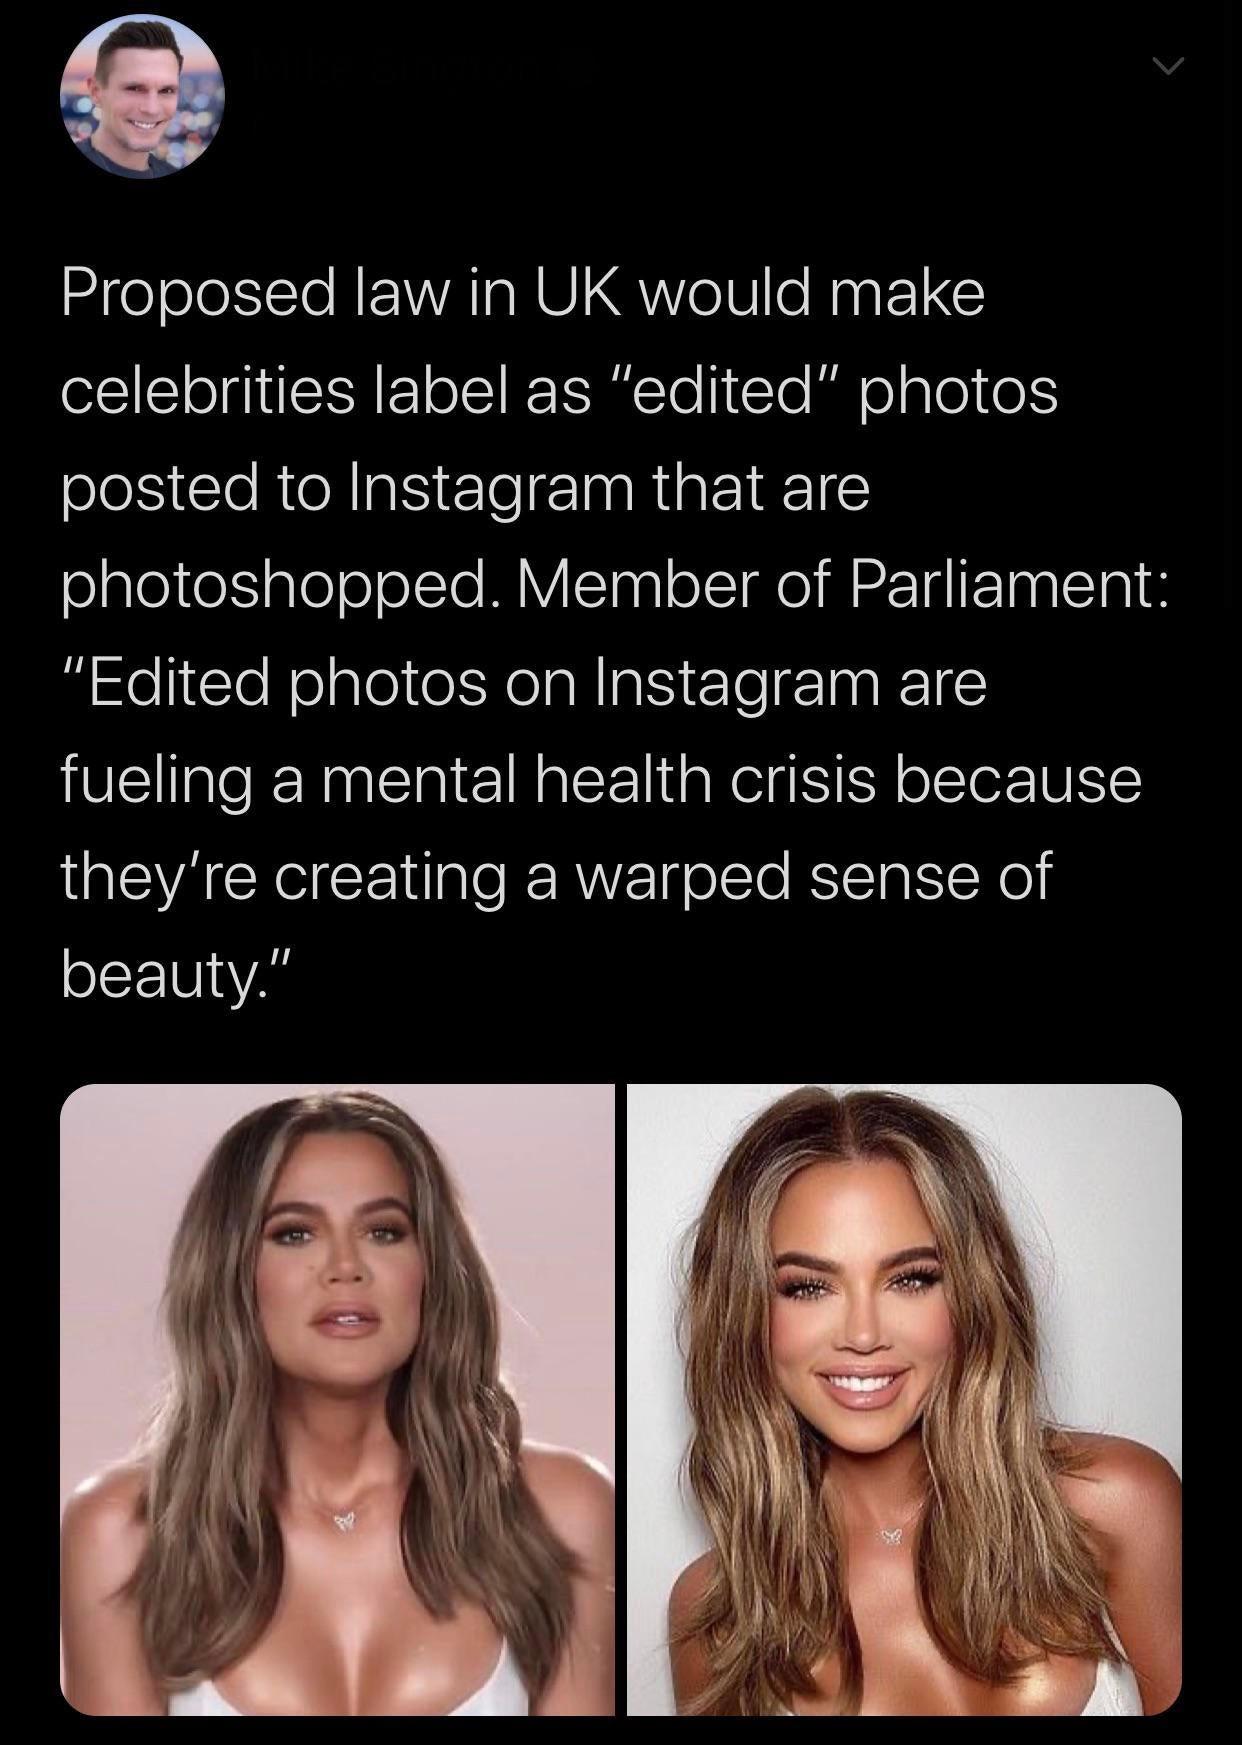 funny random pics - photo caption - Proposed law in Uk would make celebrities label as "edited" photos posted to Instagram that are photoshopped. Member of Parliament "Edited photos on Instagram are fueling a mental health crisis because they're creating 